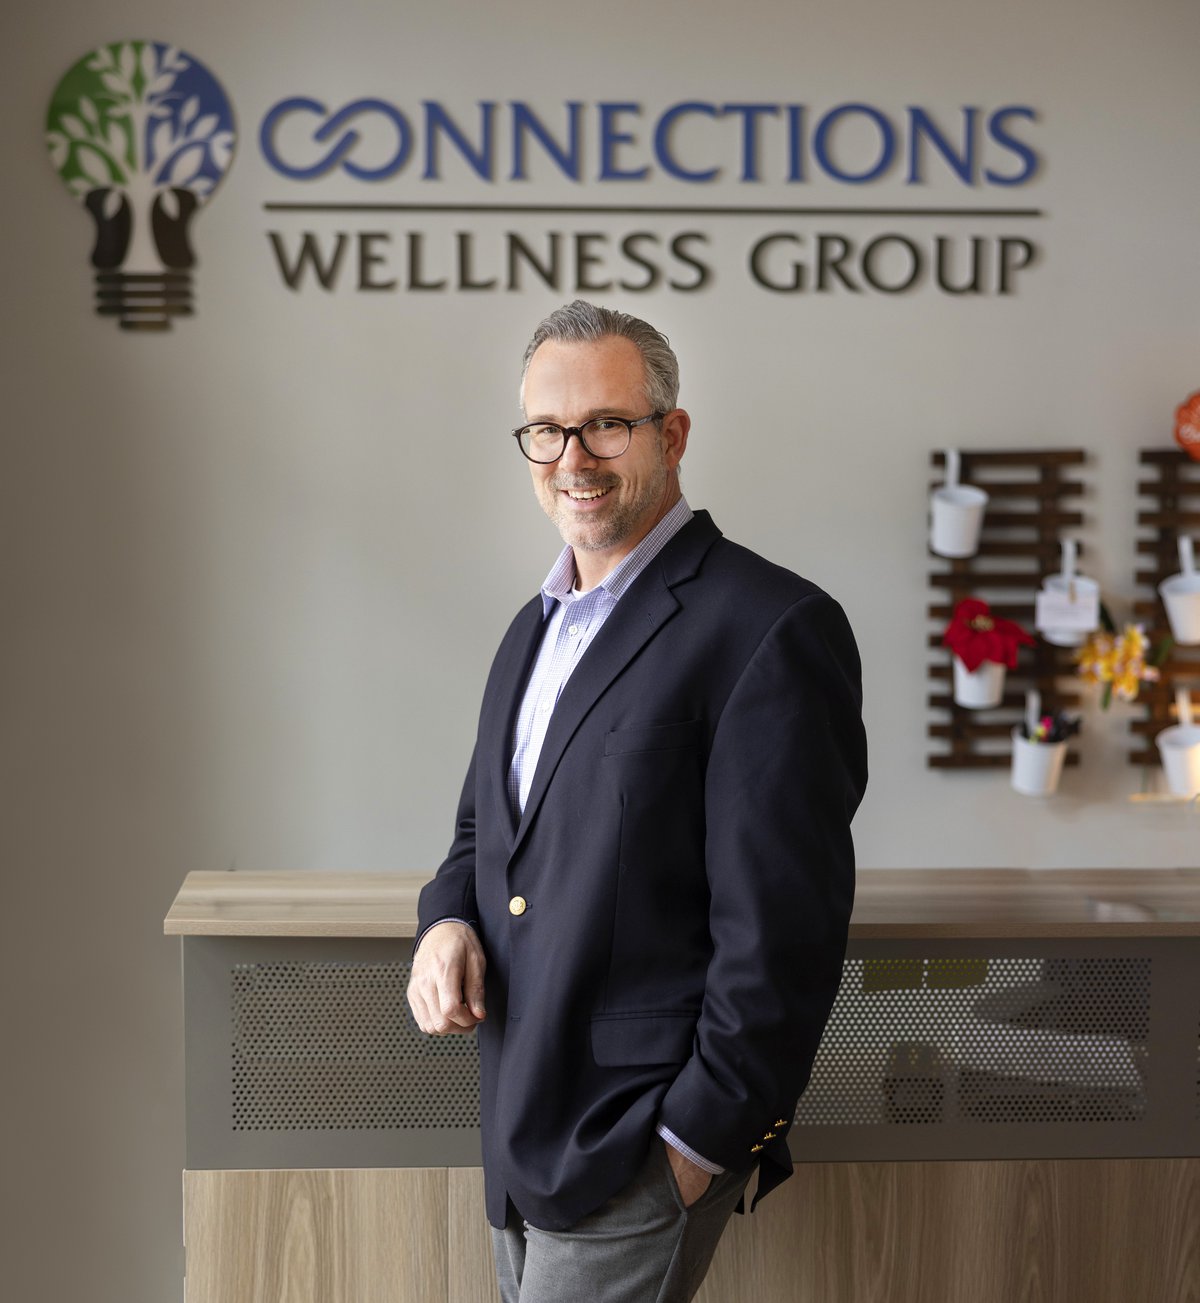 Connections Wellness Group Southlake Style — Southlakes Premiere Lifestyle Resource 1463